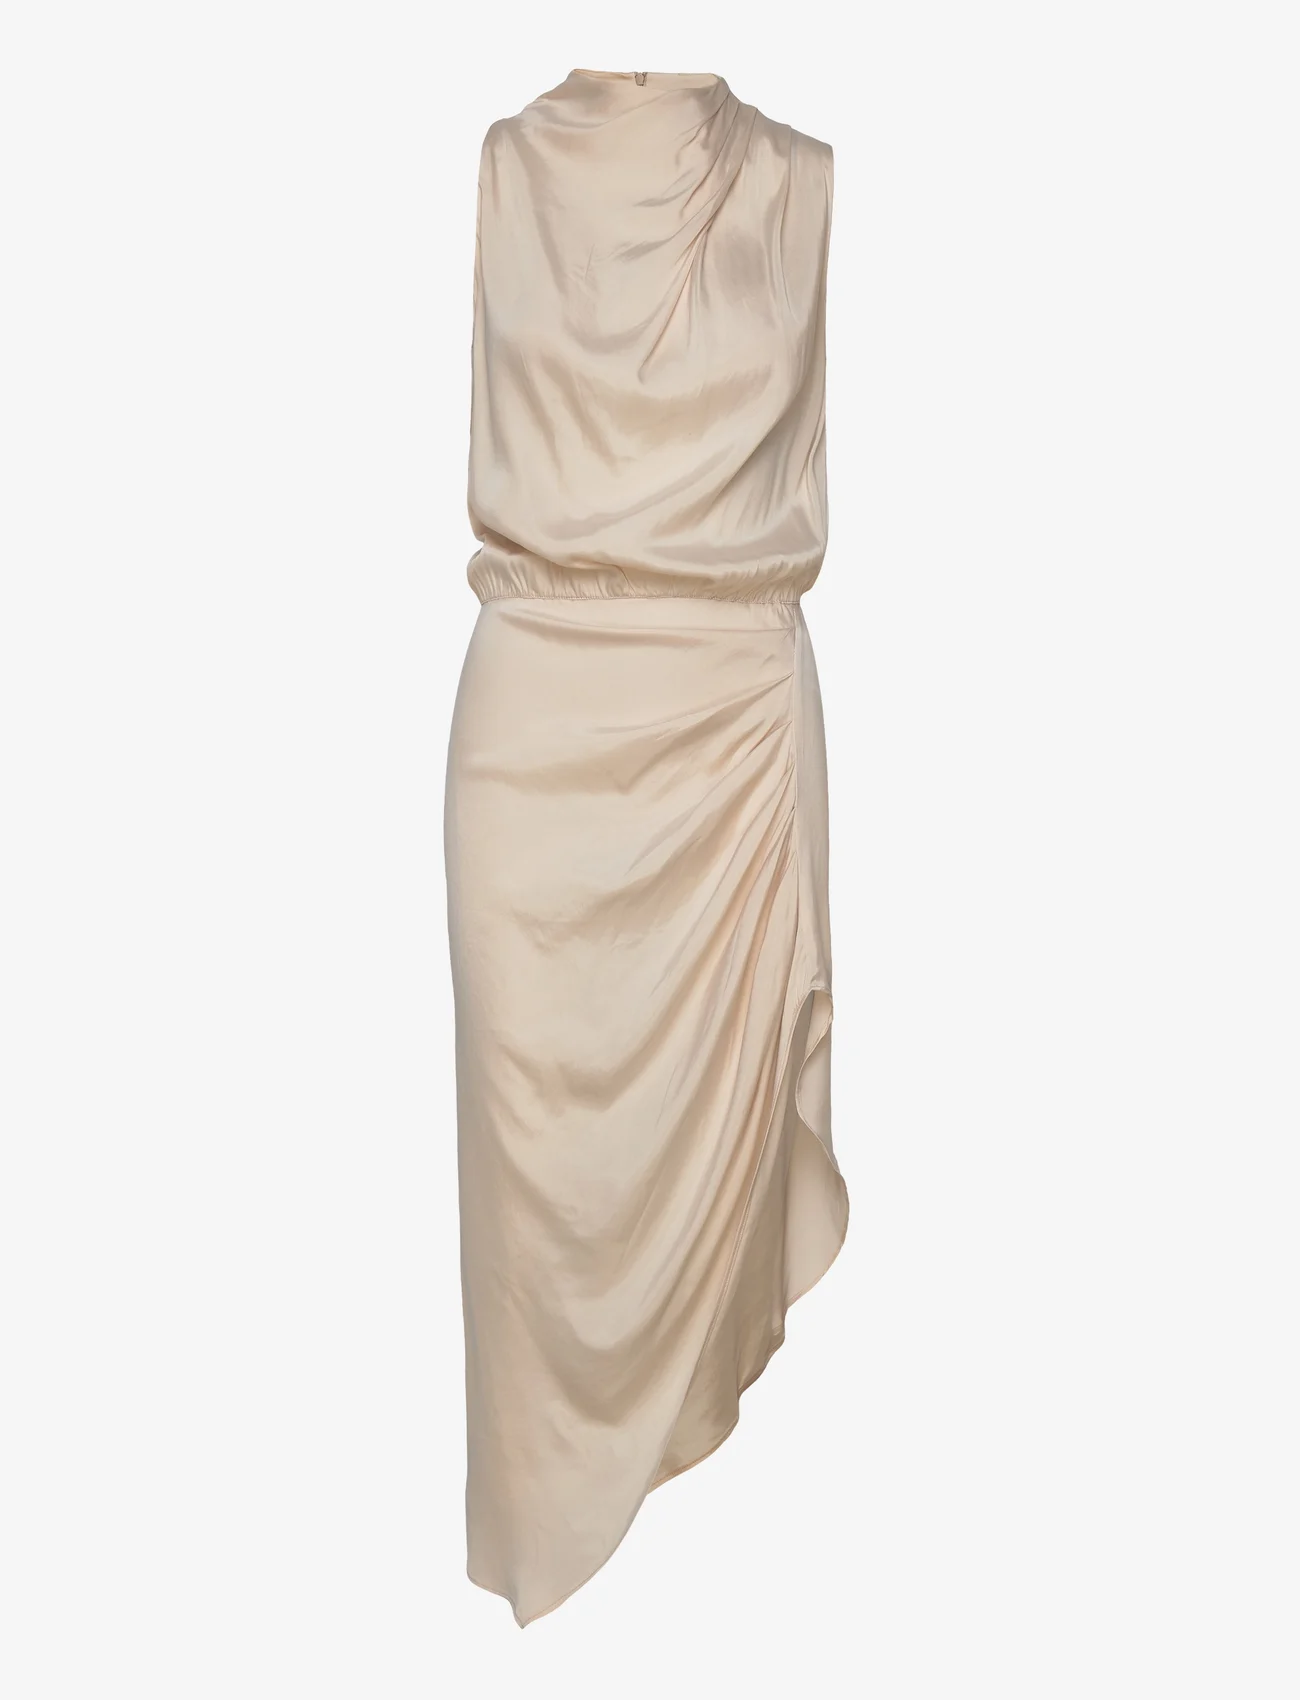 Ahlvar Gallery - Tilda dress - party wear at outlet prices - cream - 0